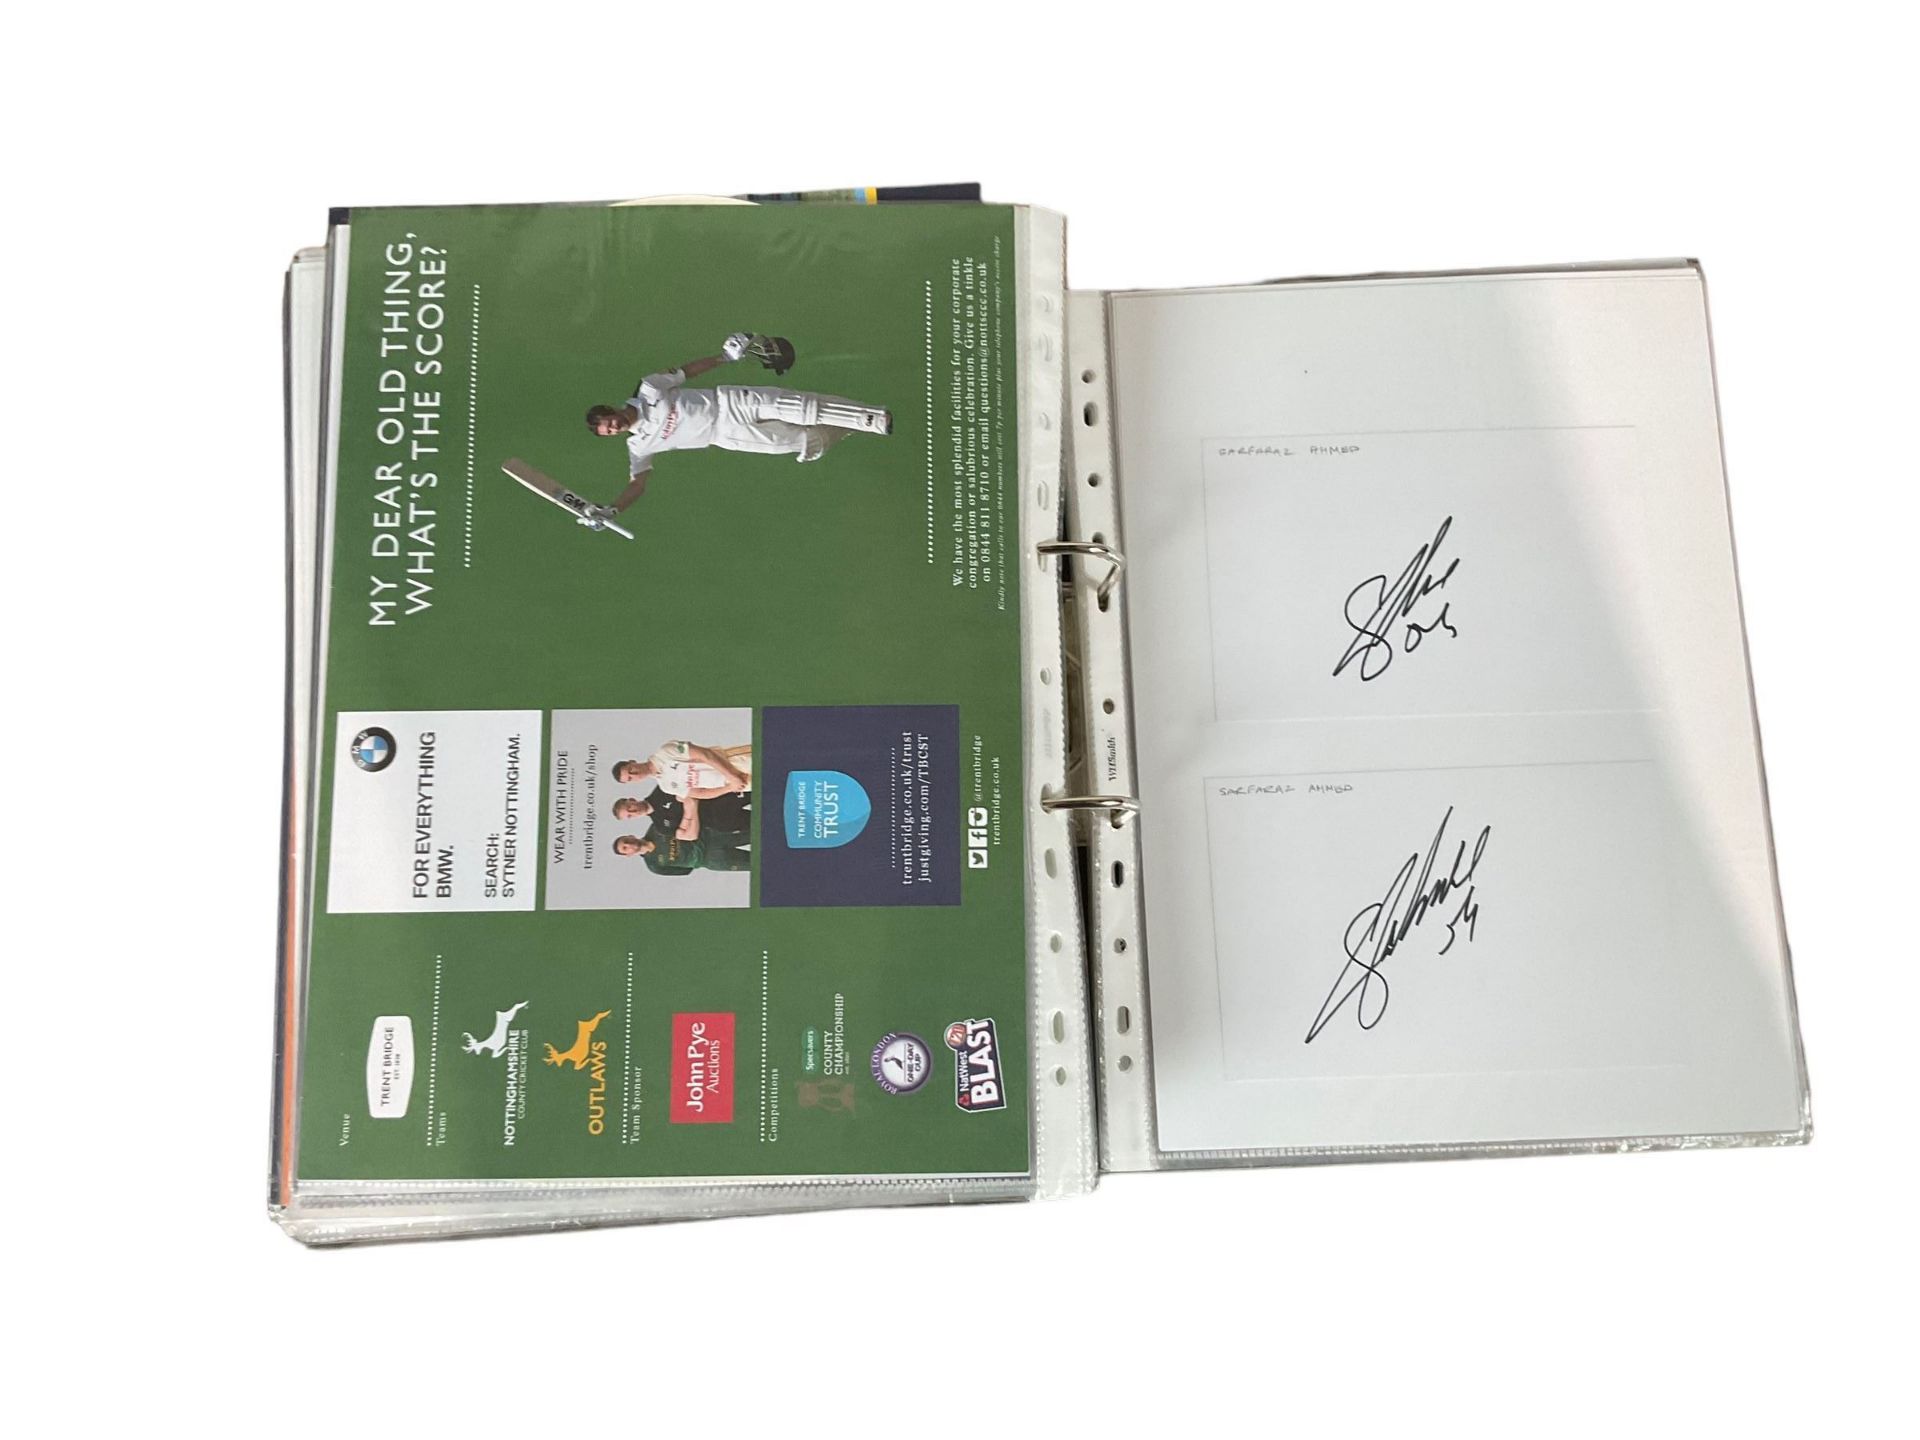 Yorkshire Cricket - various autographs and signatures including Adil Rashid - Image 12 of 14